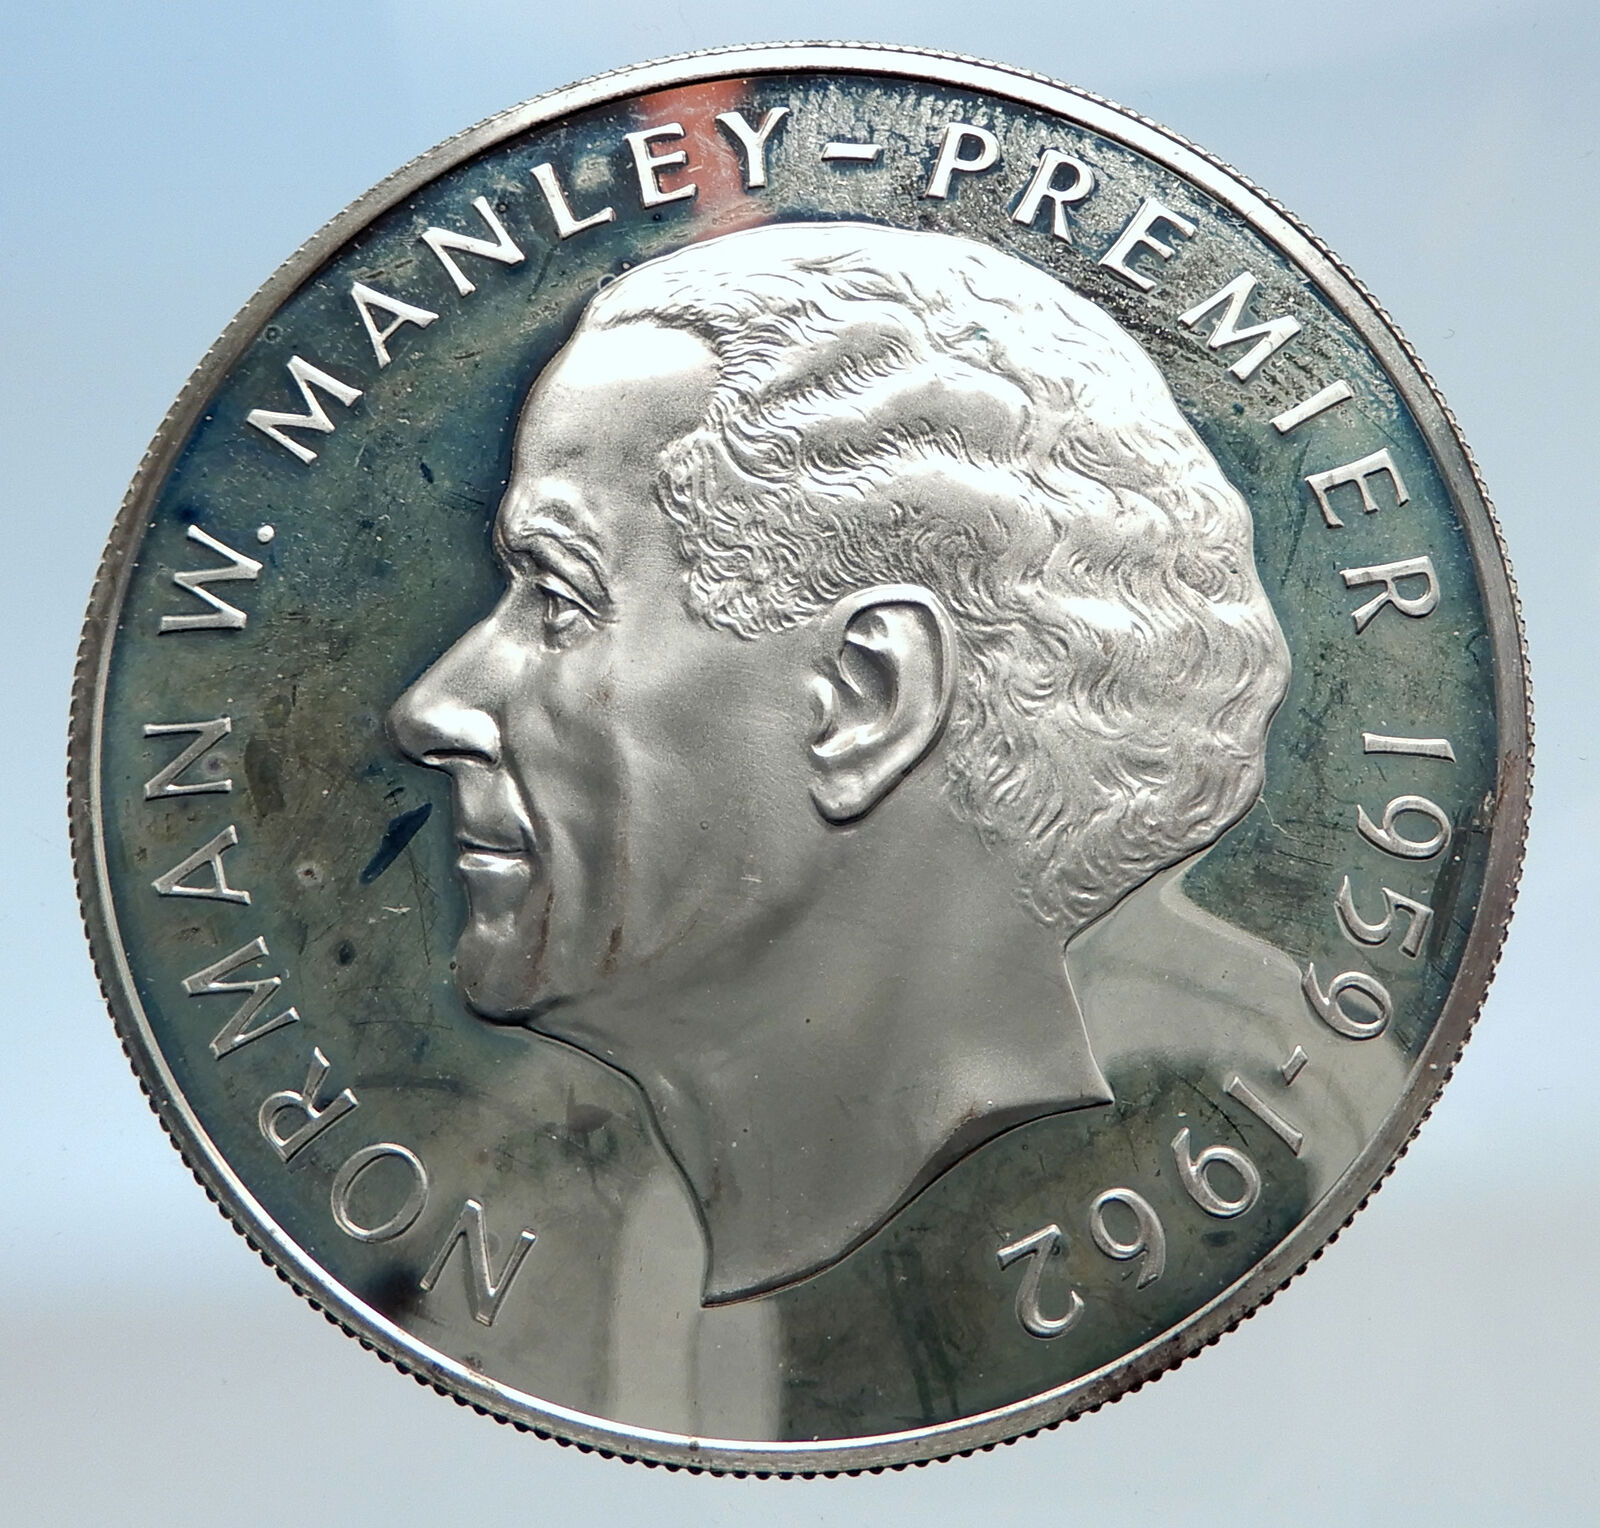 1973 JAMAICA Proof HUGE 4.5cm Premier Norman W Manley Silver $5 Coin i74254